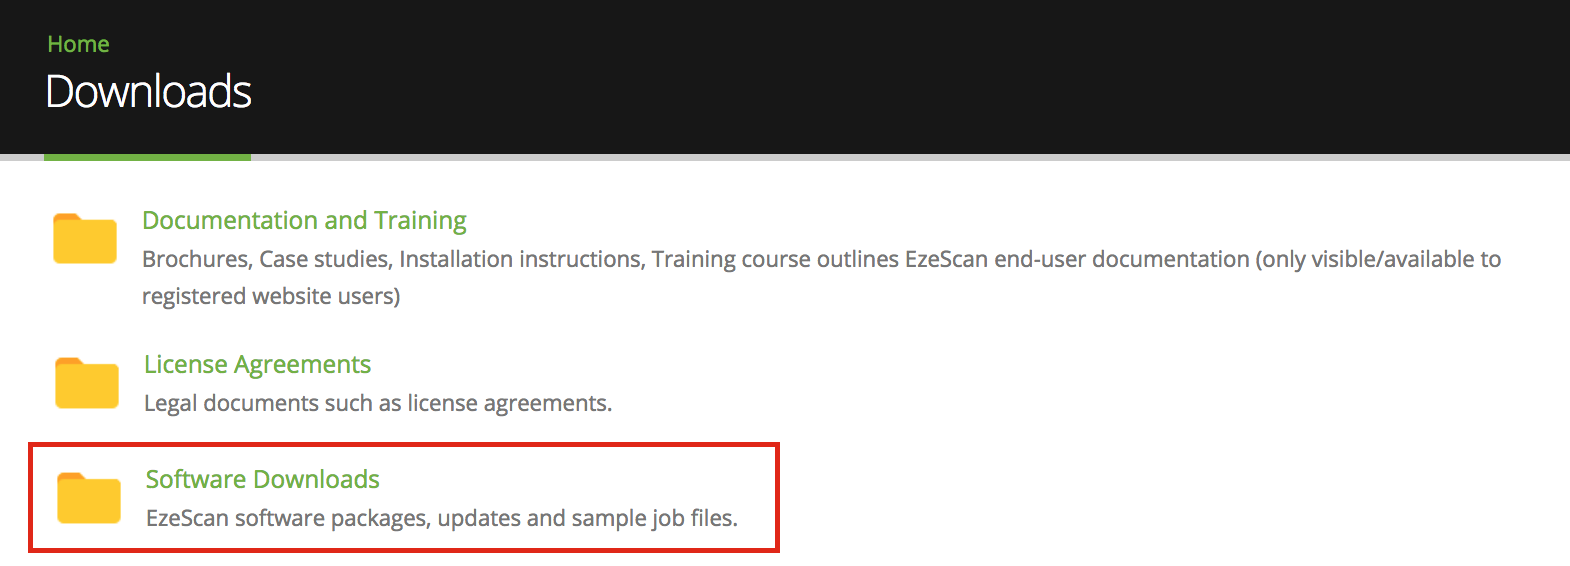 Ezescan-FAQ-Downloading-an-evaluation-version-of-EzeScan-Image6.png